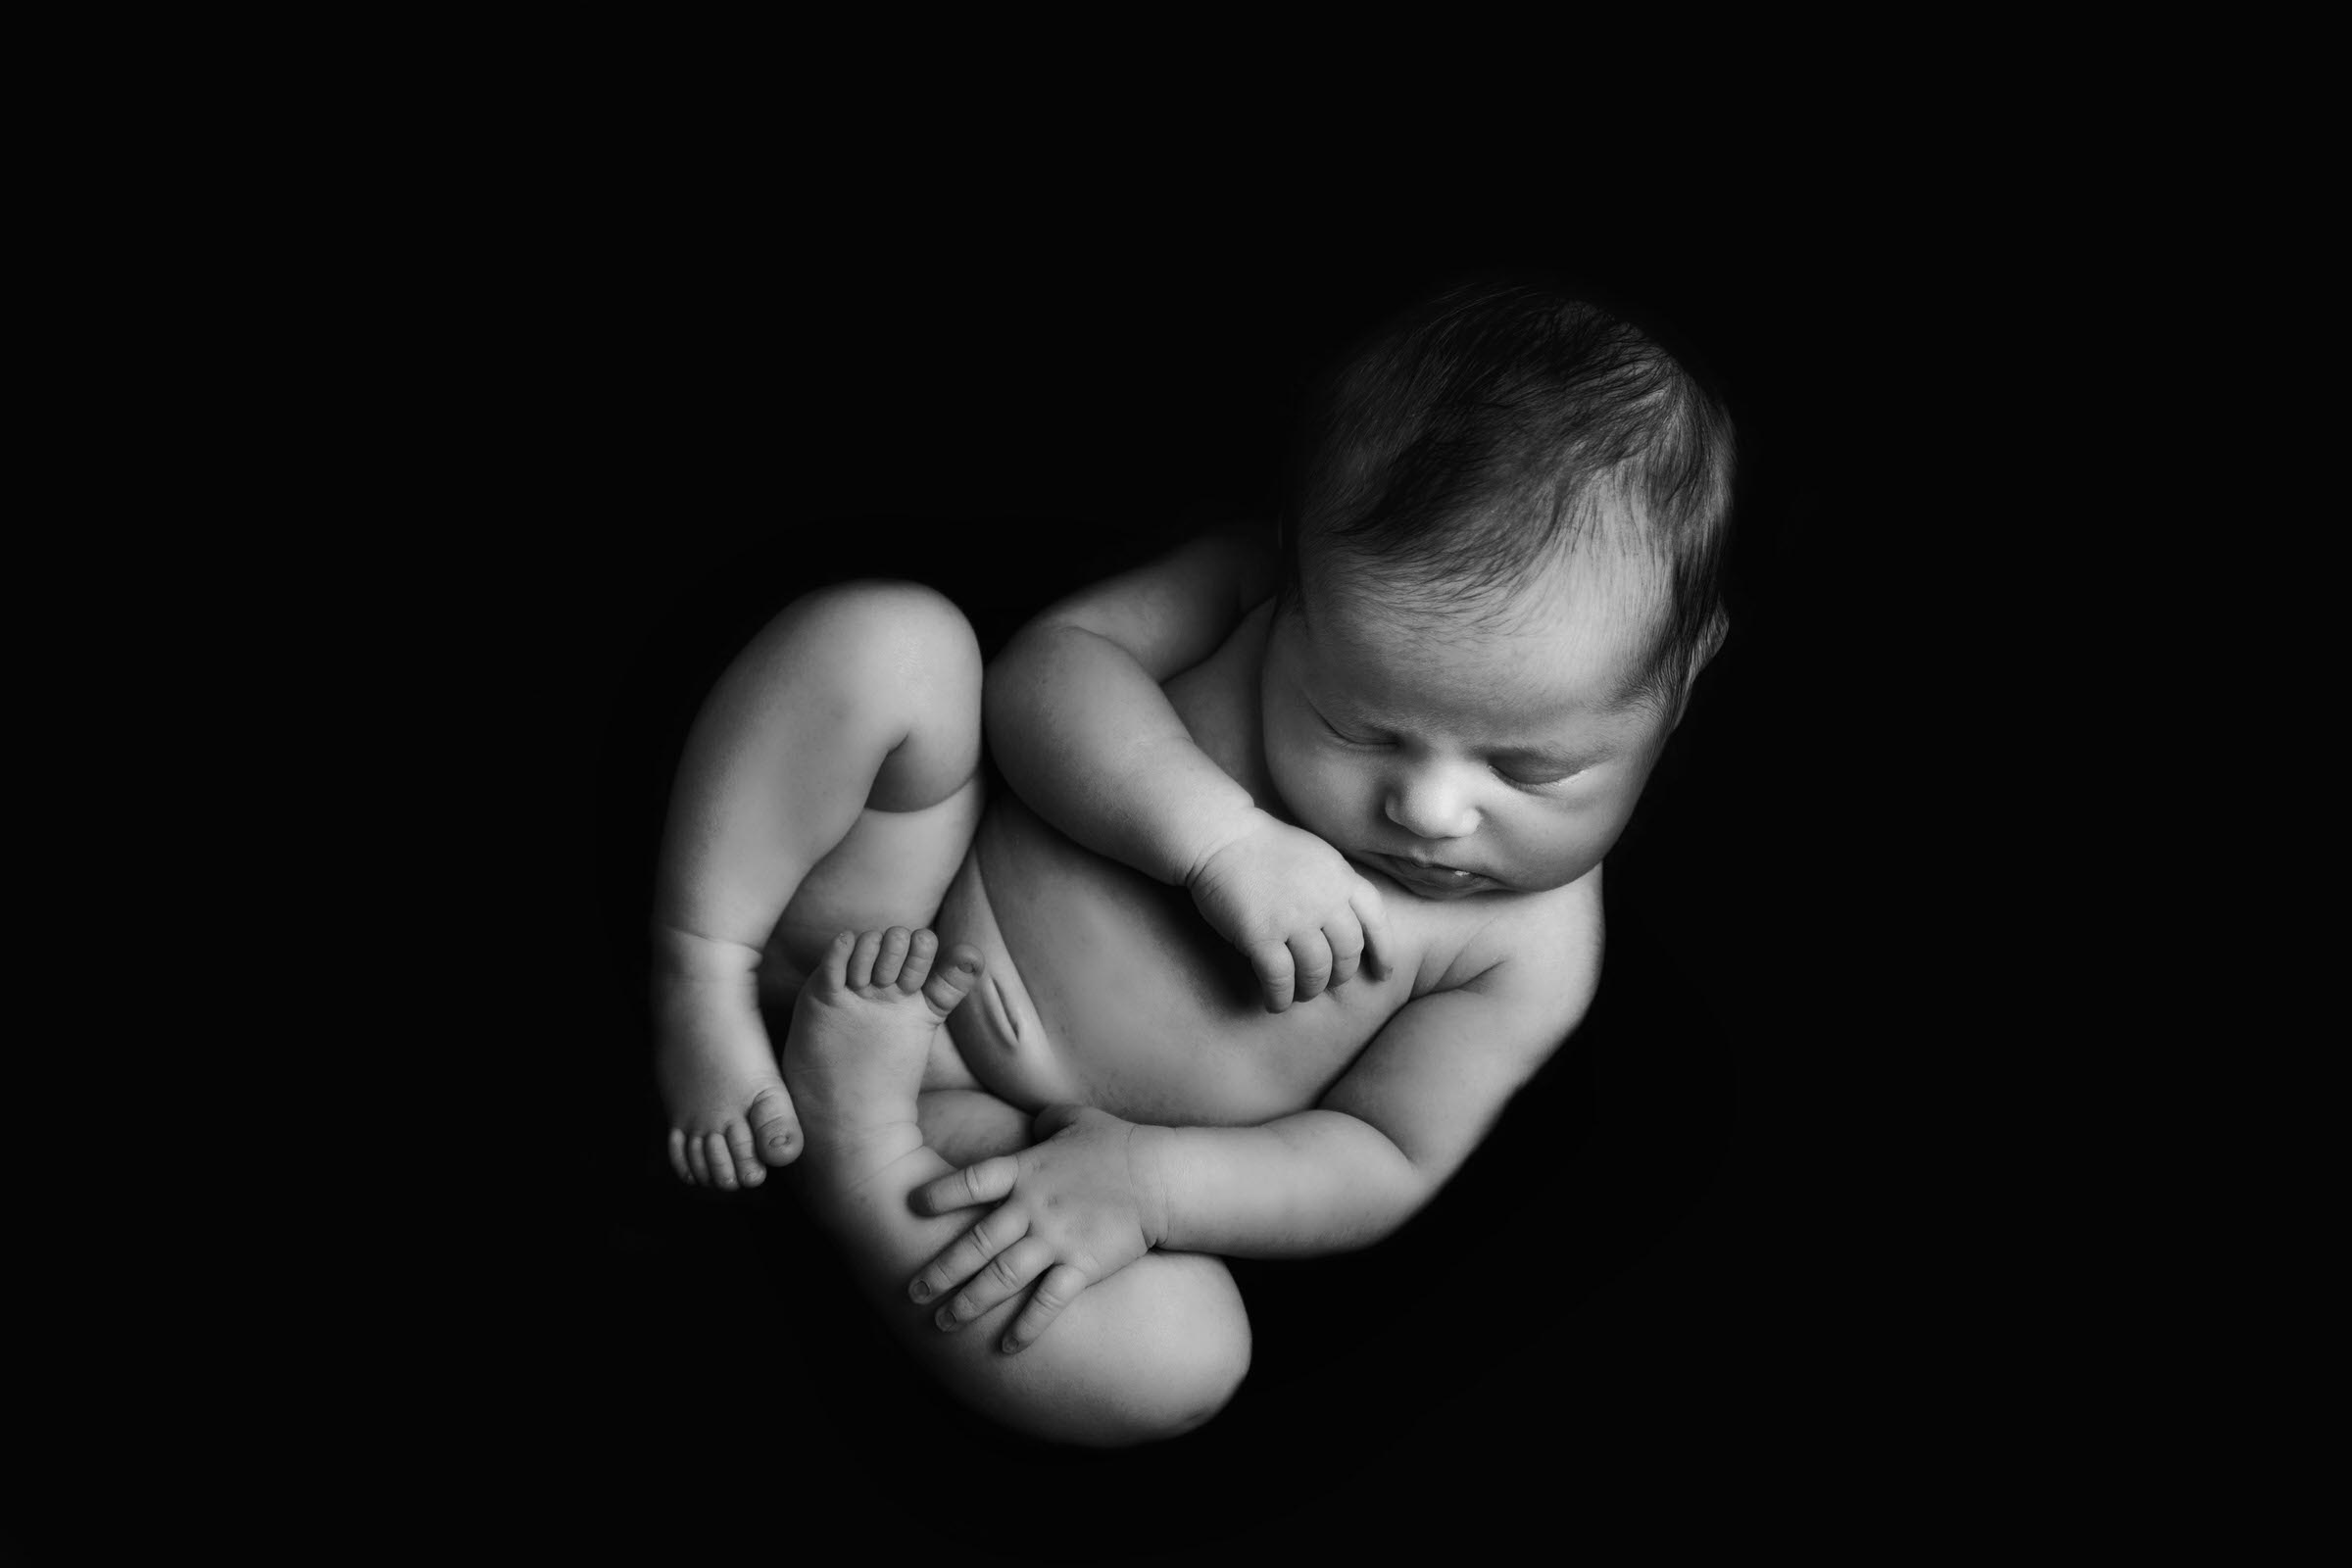 Private Policy – Baby Photographer Essex